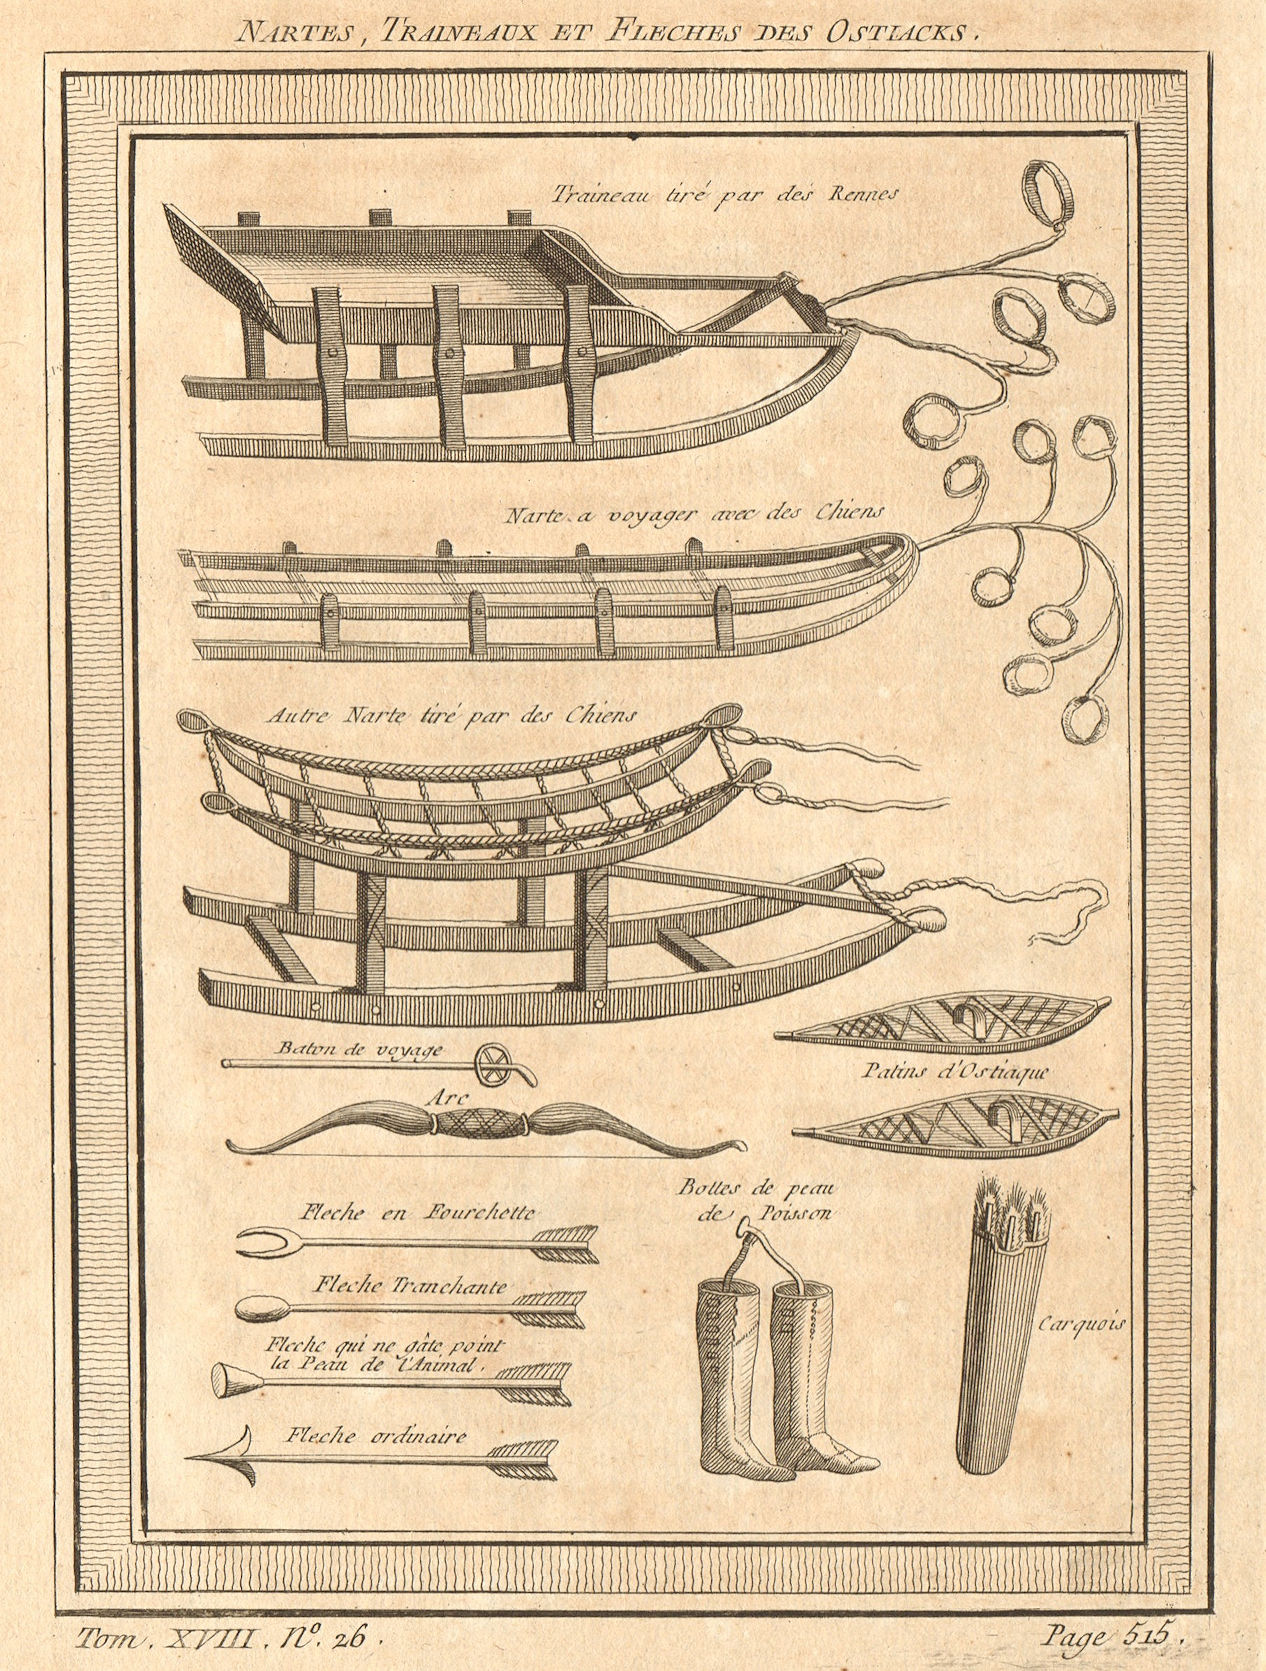 Associate Product Nartes, sledges and bows & arrows of the Khanty (Ostyaks), Siberia, Russia 1768